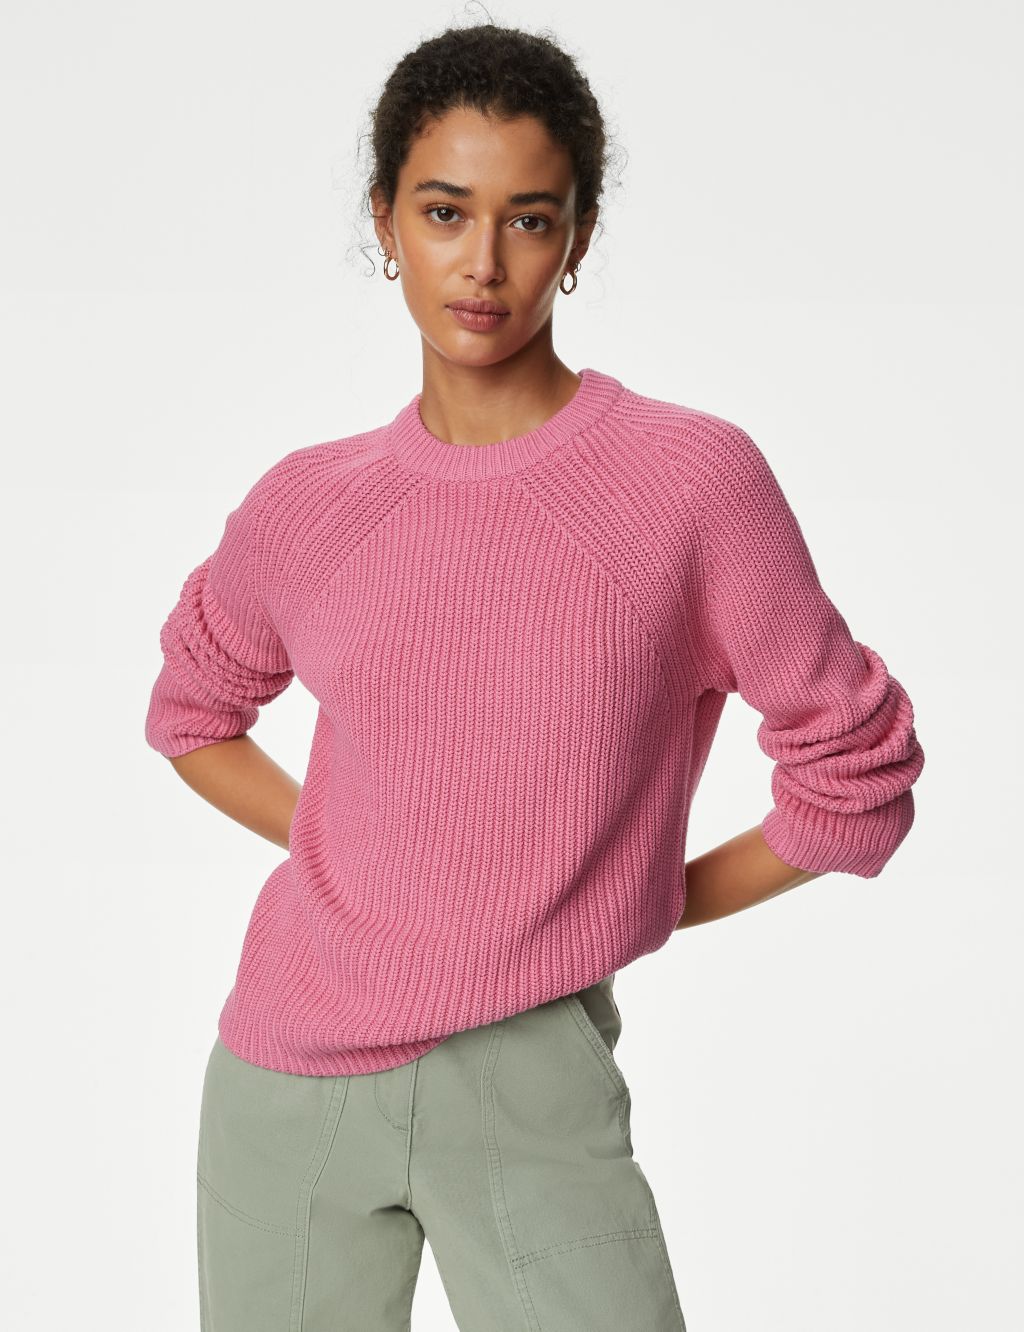 Cotton Rich Ribbed Crew Neck Jumper image 4